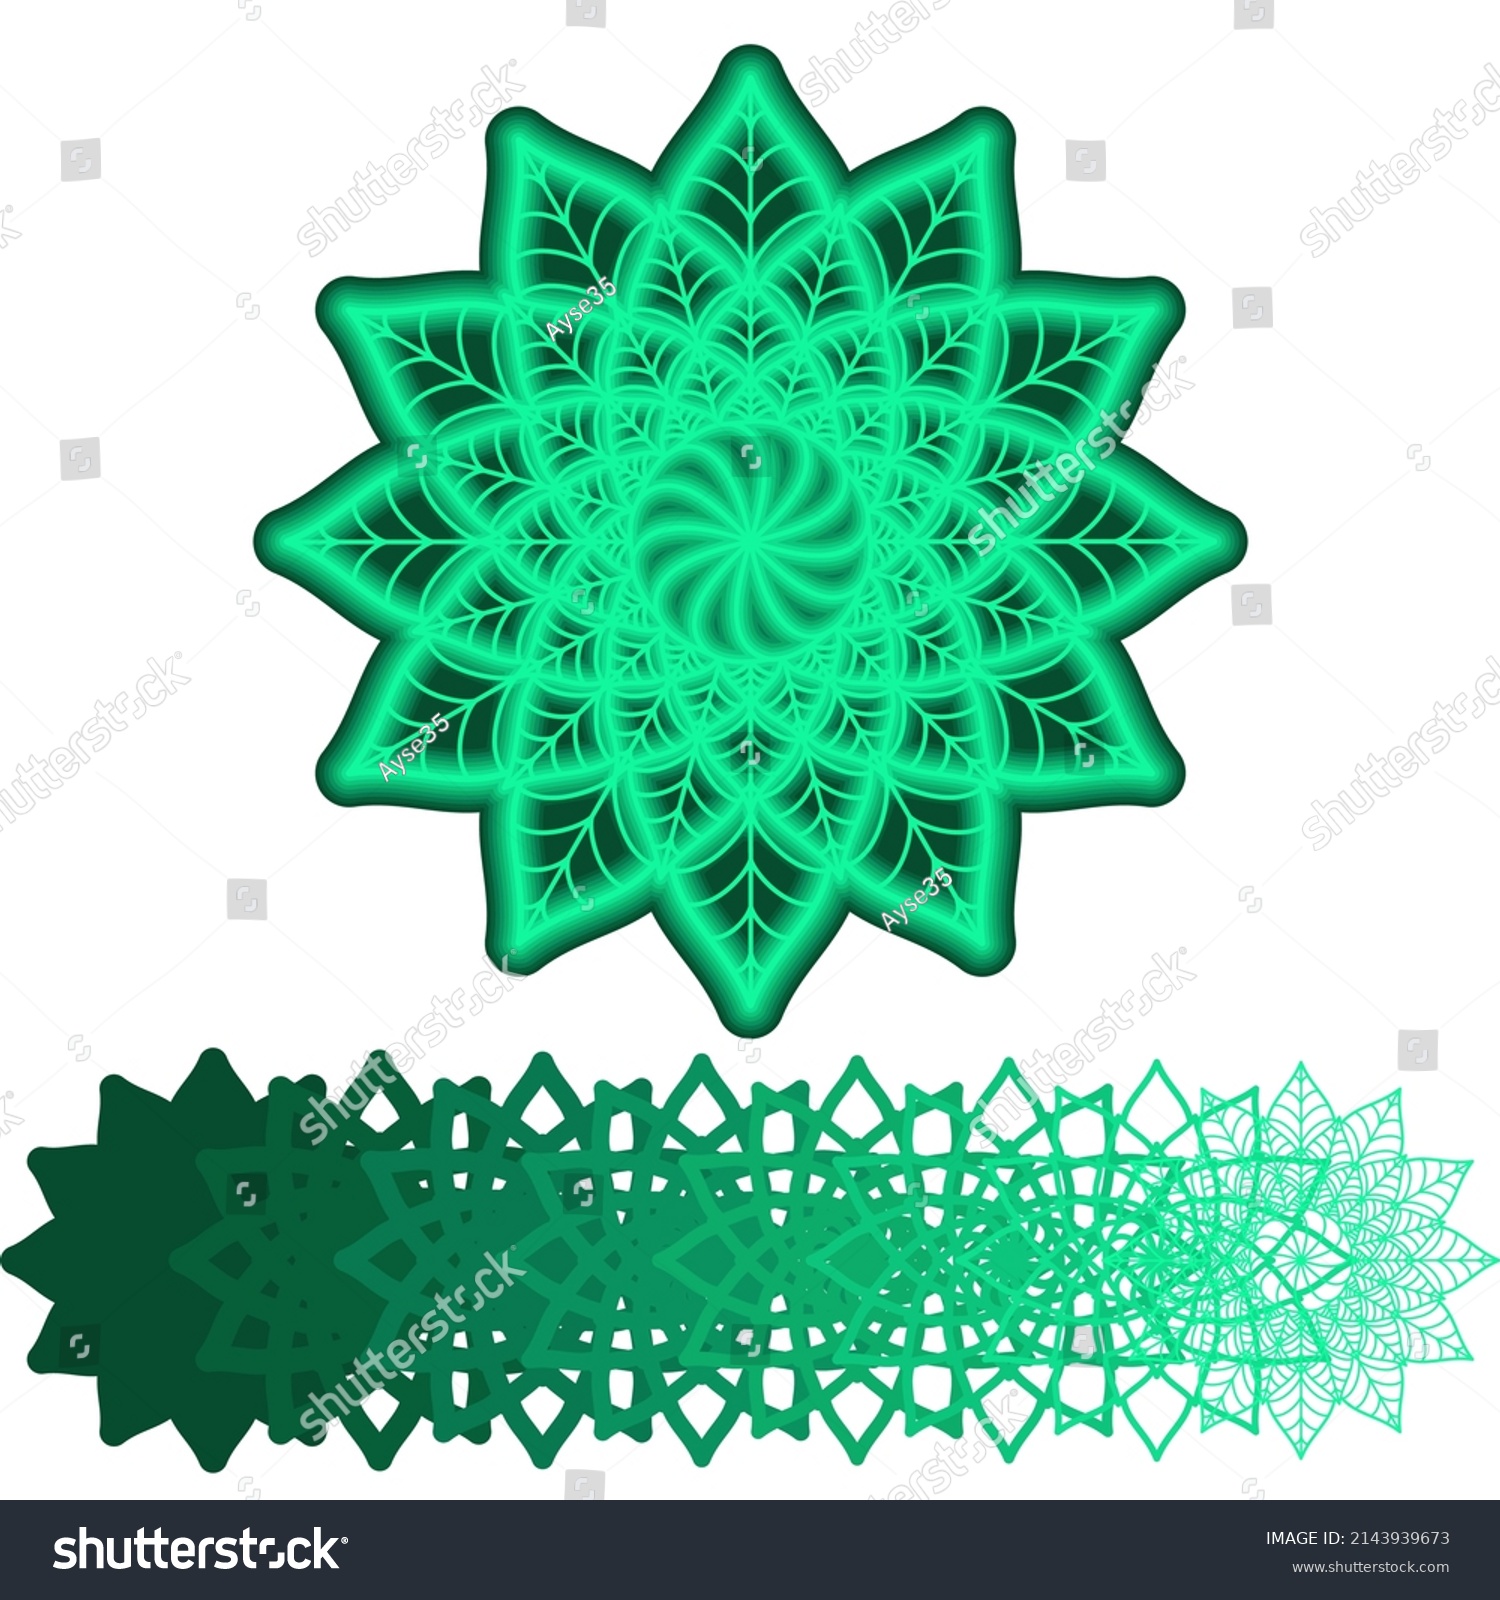 SVG of 3d Layered Mandala. Eps10 Mandala Multilayer Cut File, 8 layers. Multilayer elements for paper cutting or machine cutting. svg